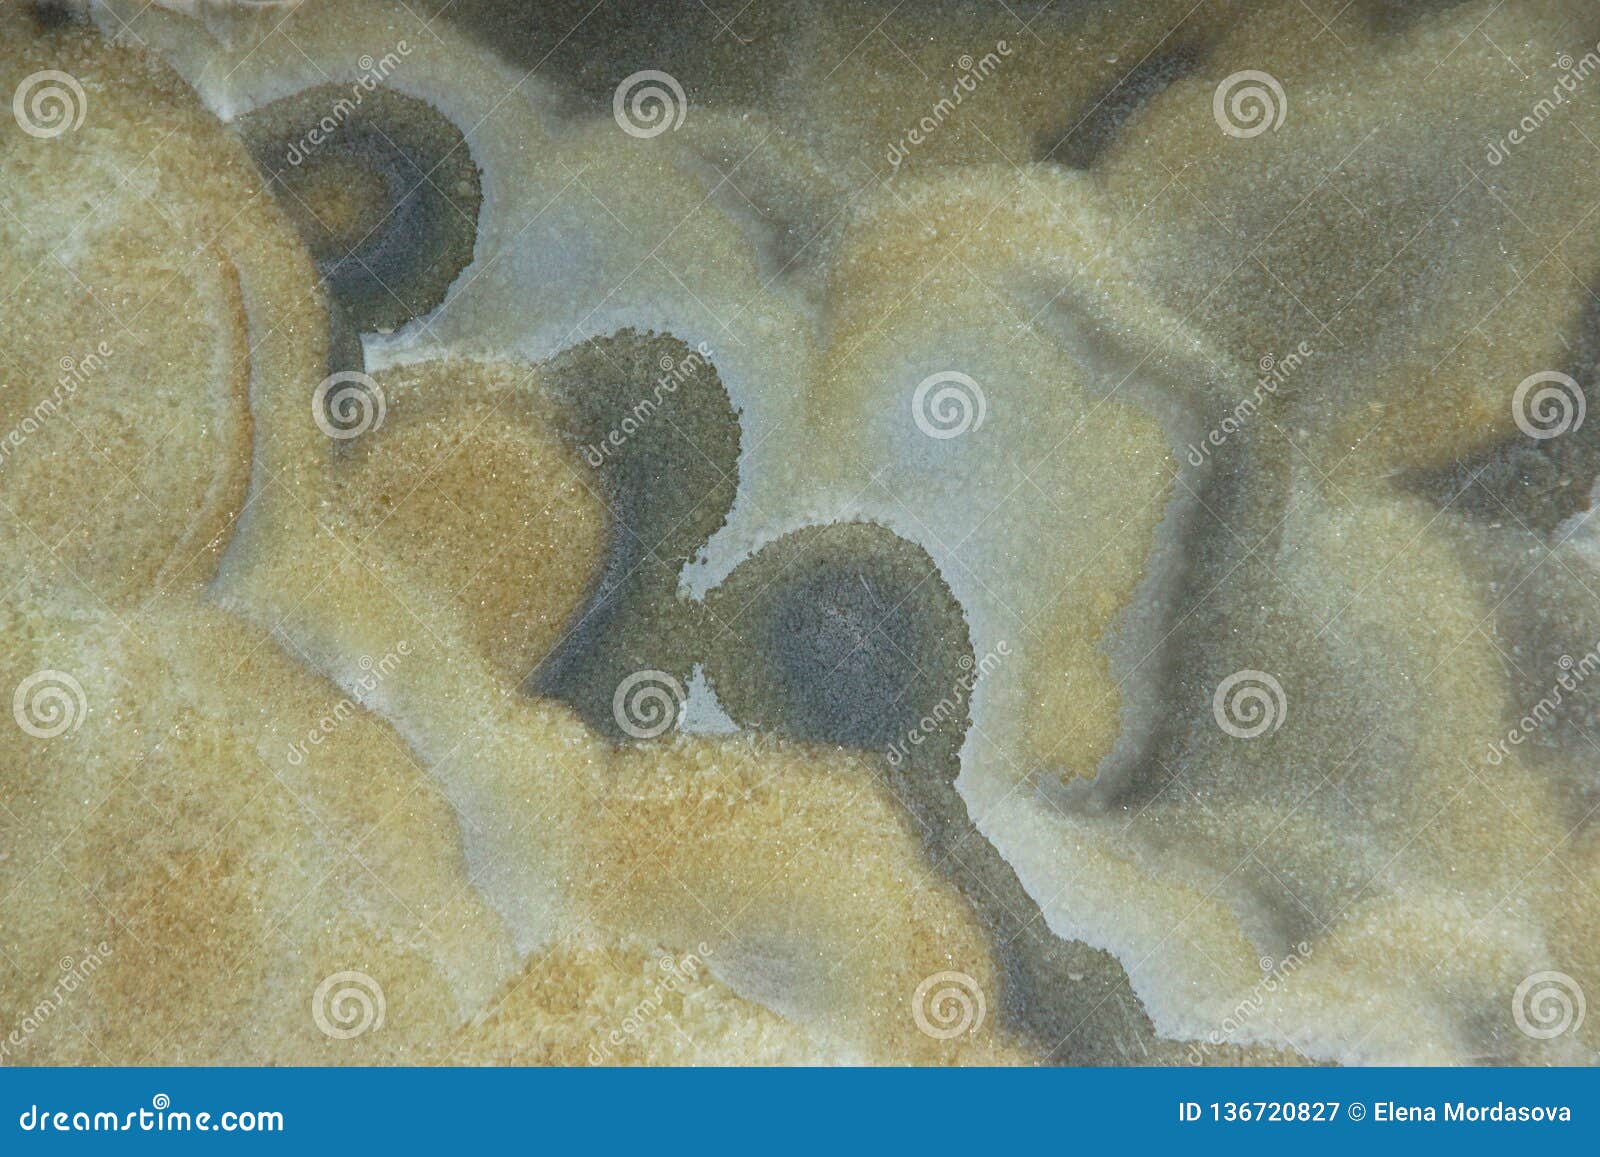 background from a natural stone onyx with bubbles and gray stains on the surface, onix naranja veteado